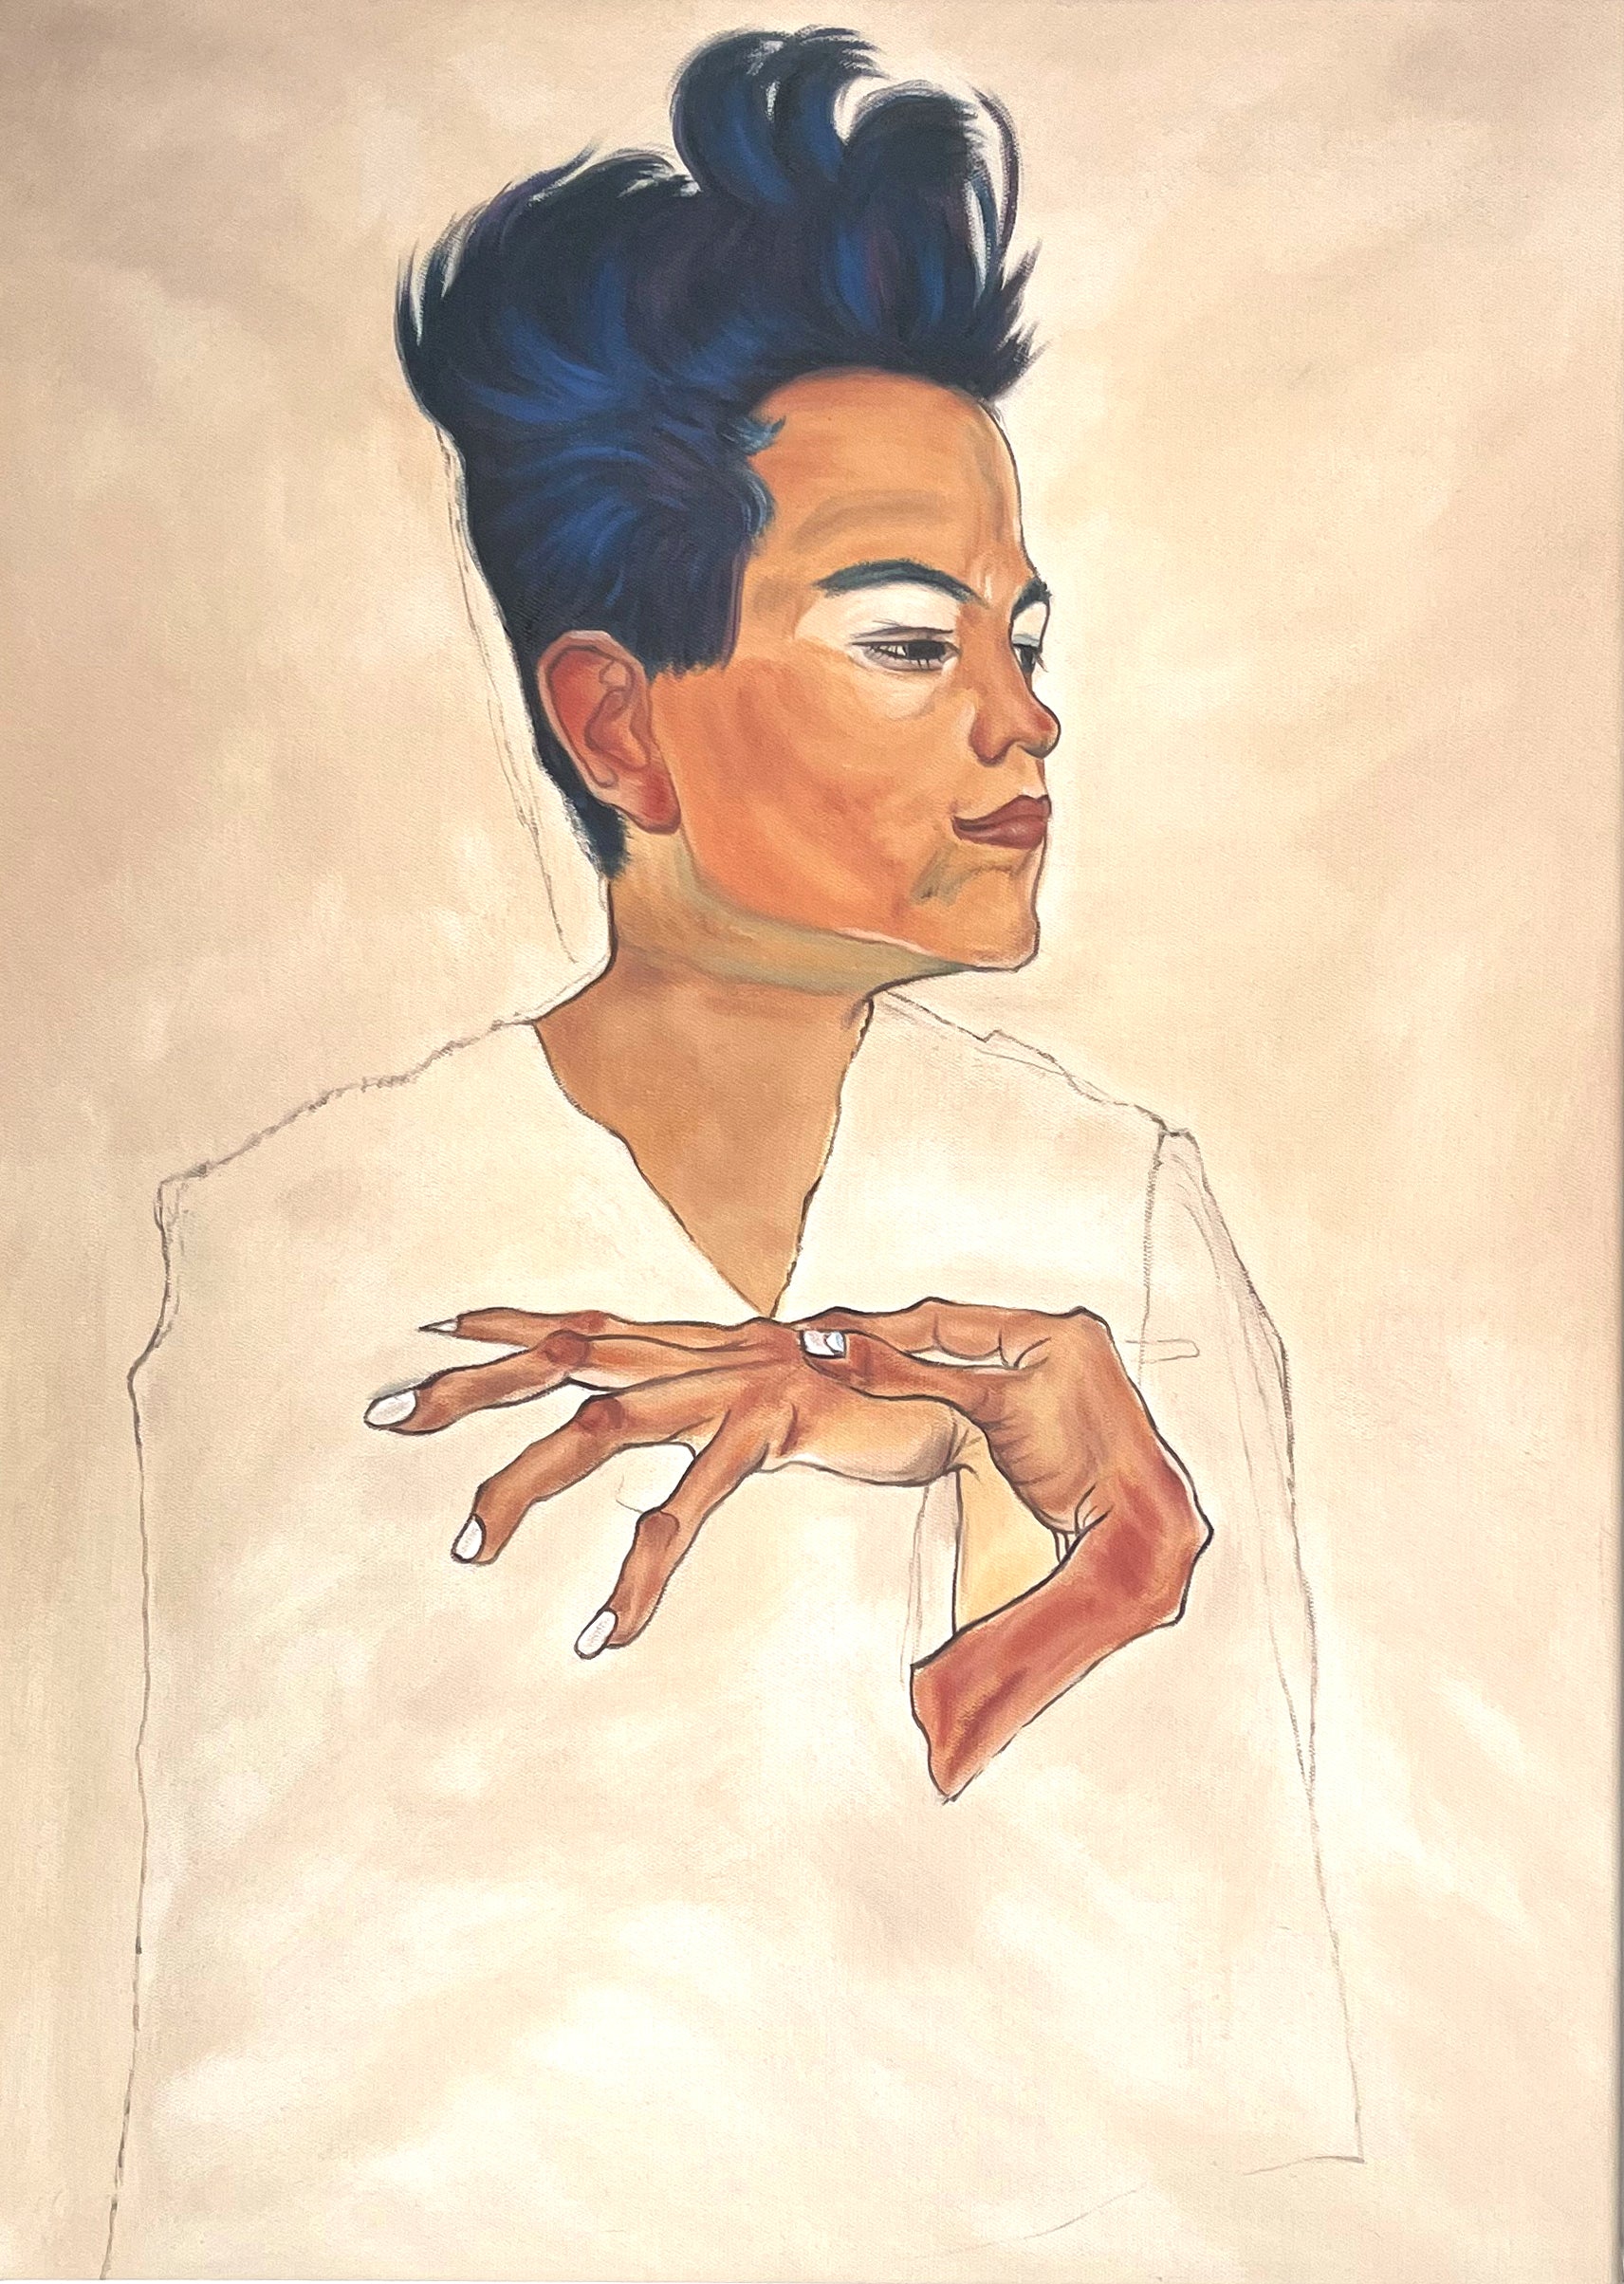 Reproduction of Egon Schiele's Self-portrait with hands clasped to